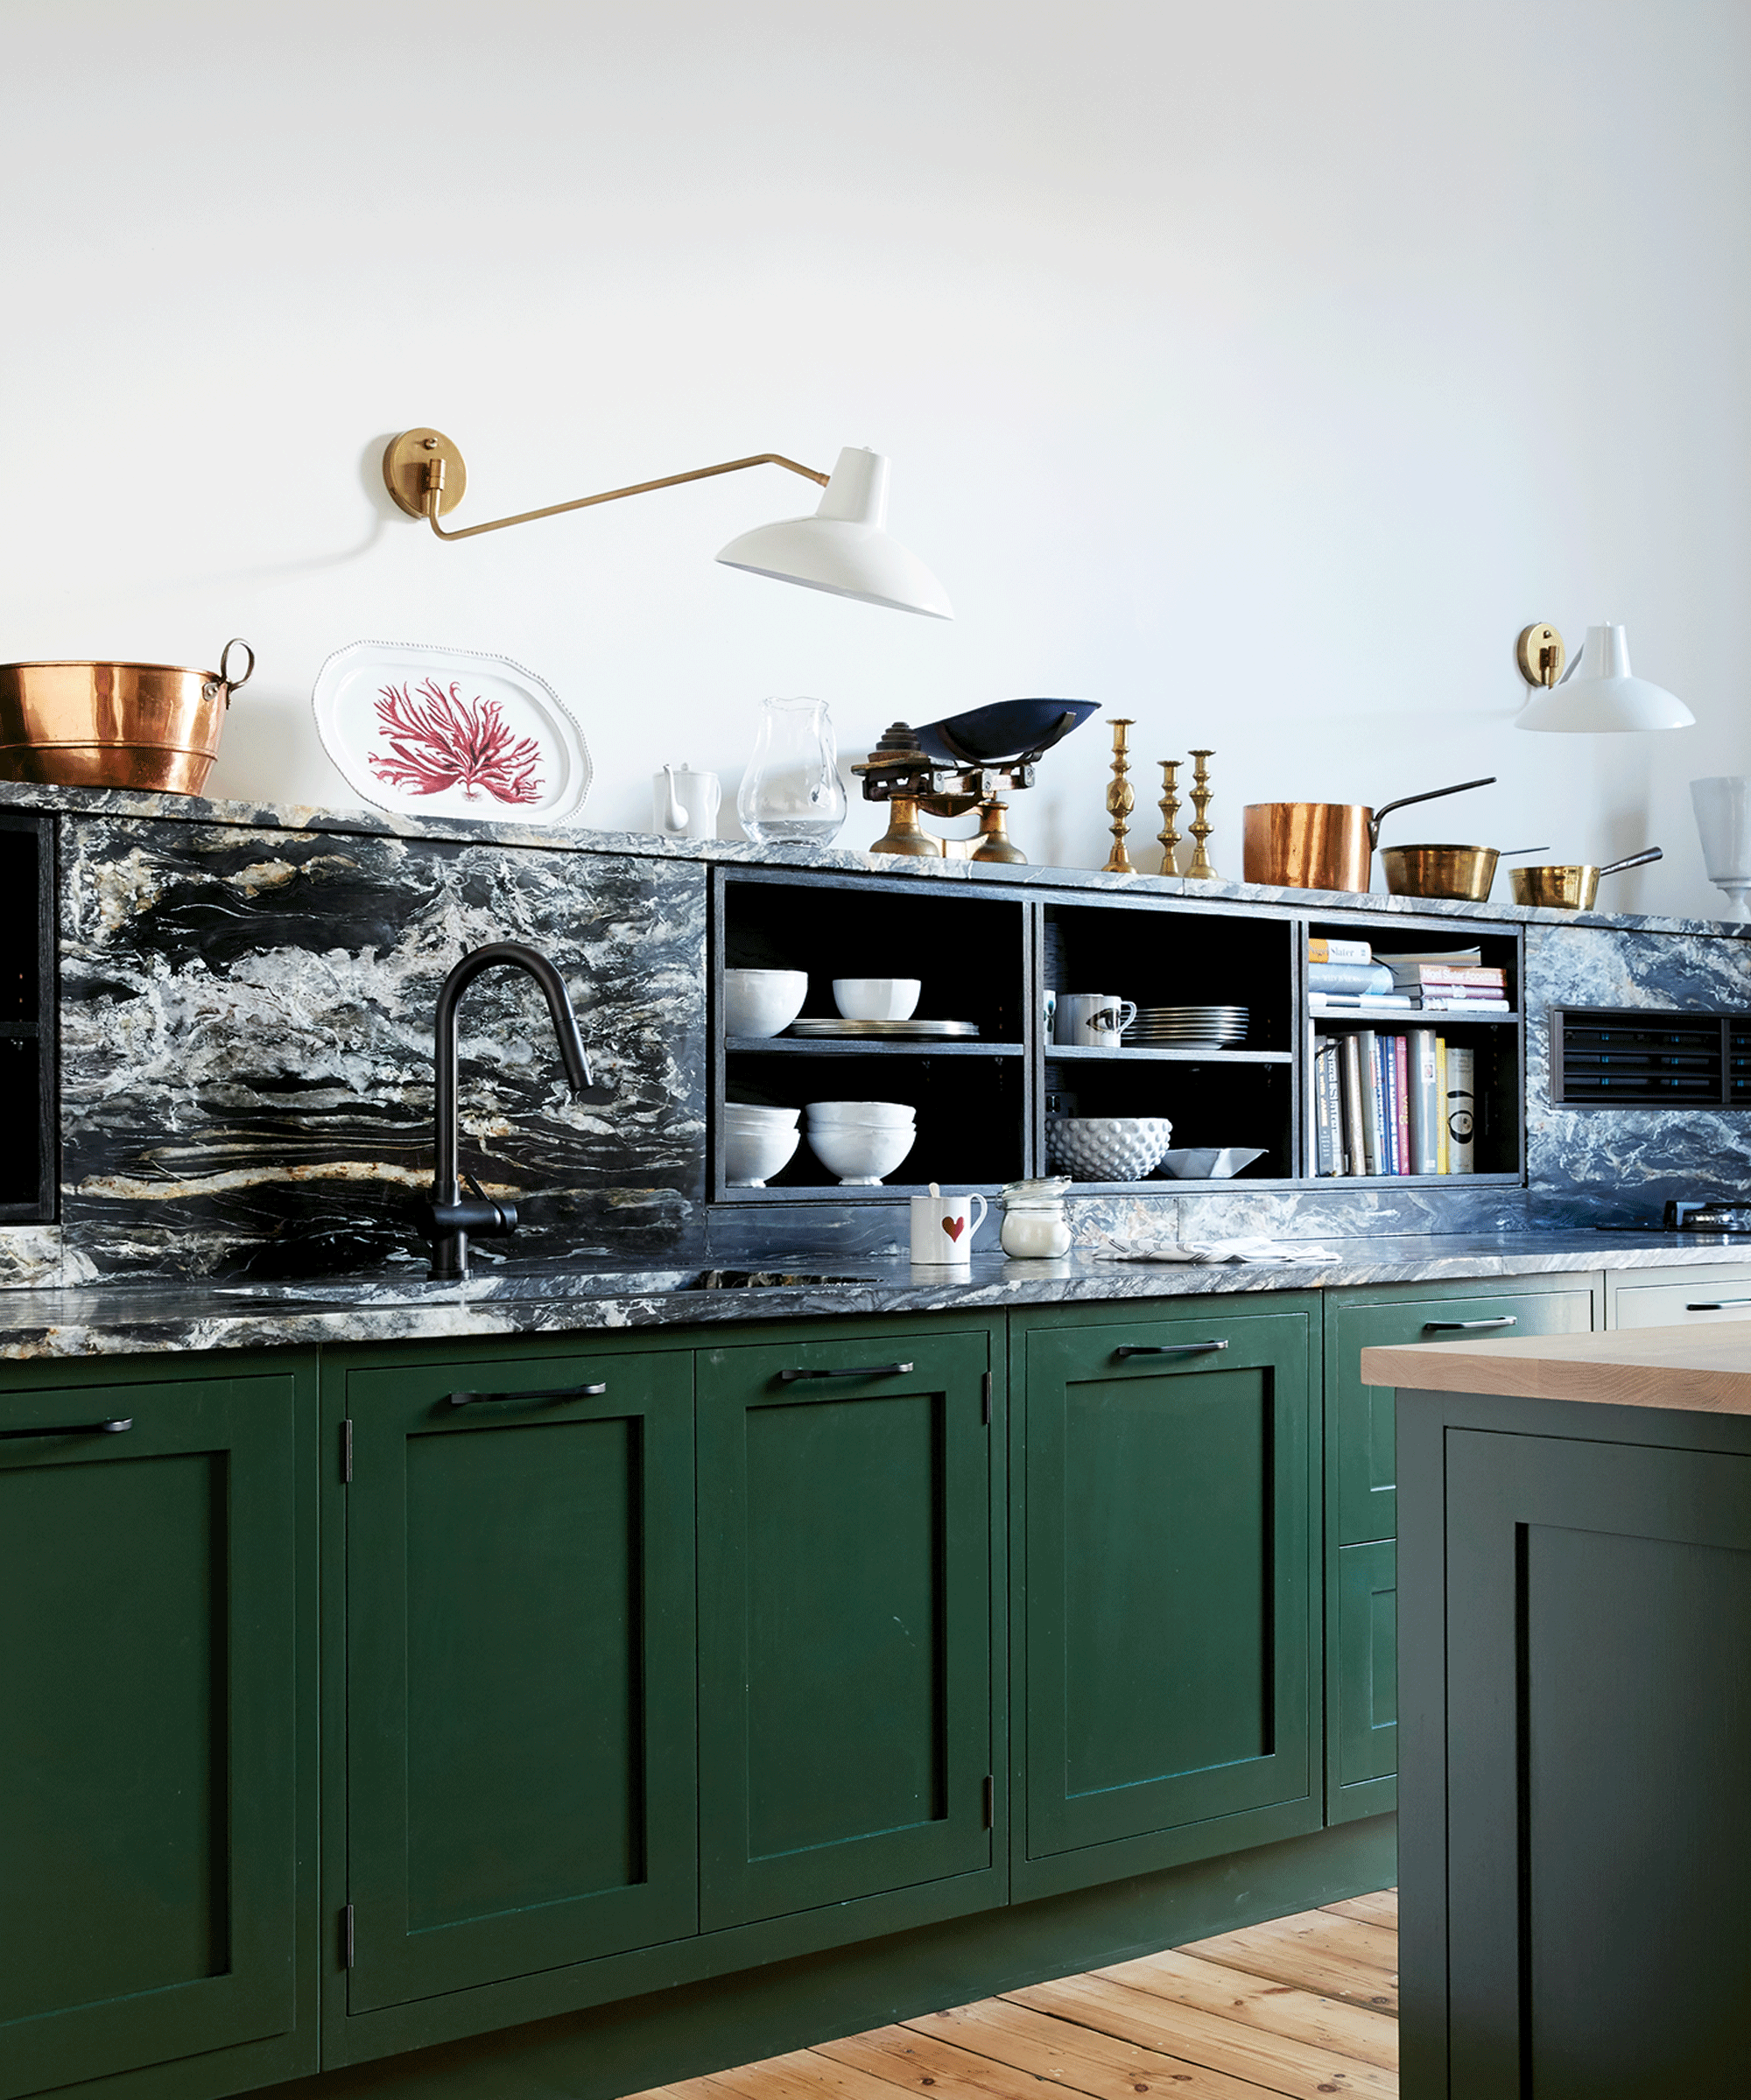 Marble veining Kitchen with green cabinets and strongly veined marble on the worktop and splashback